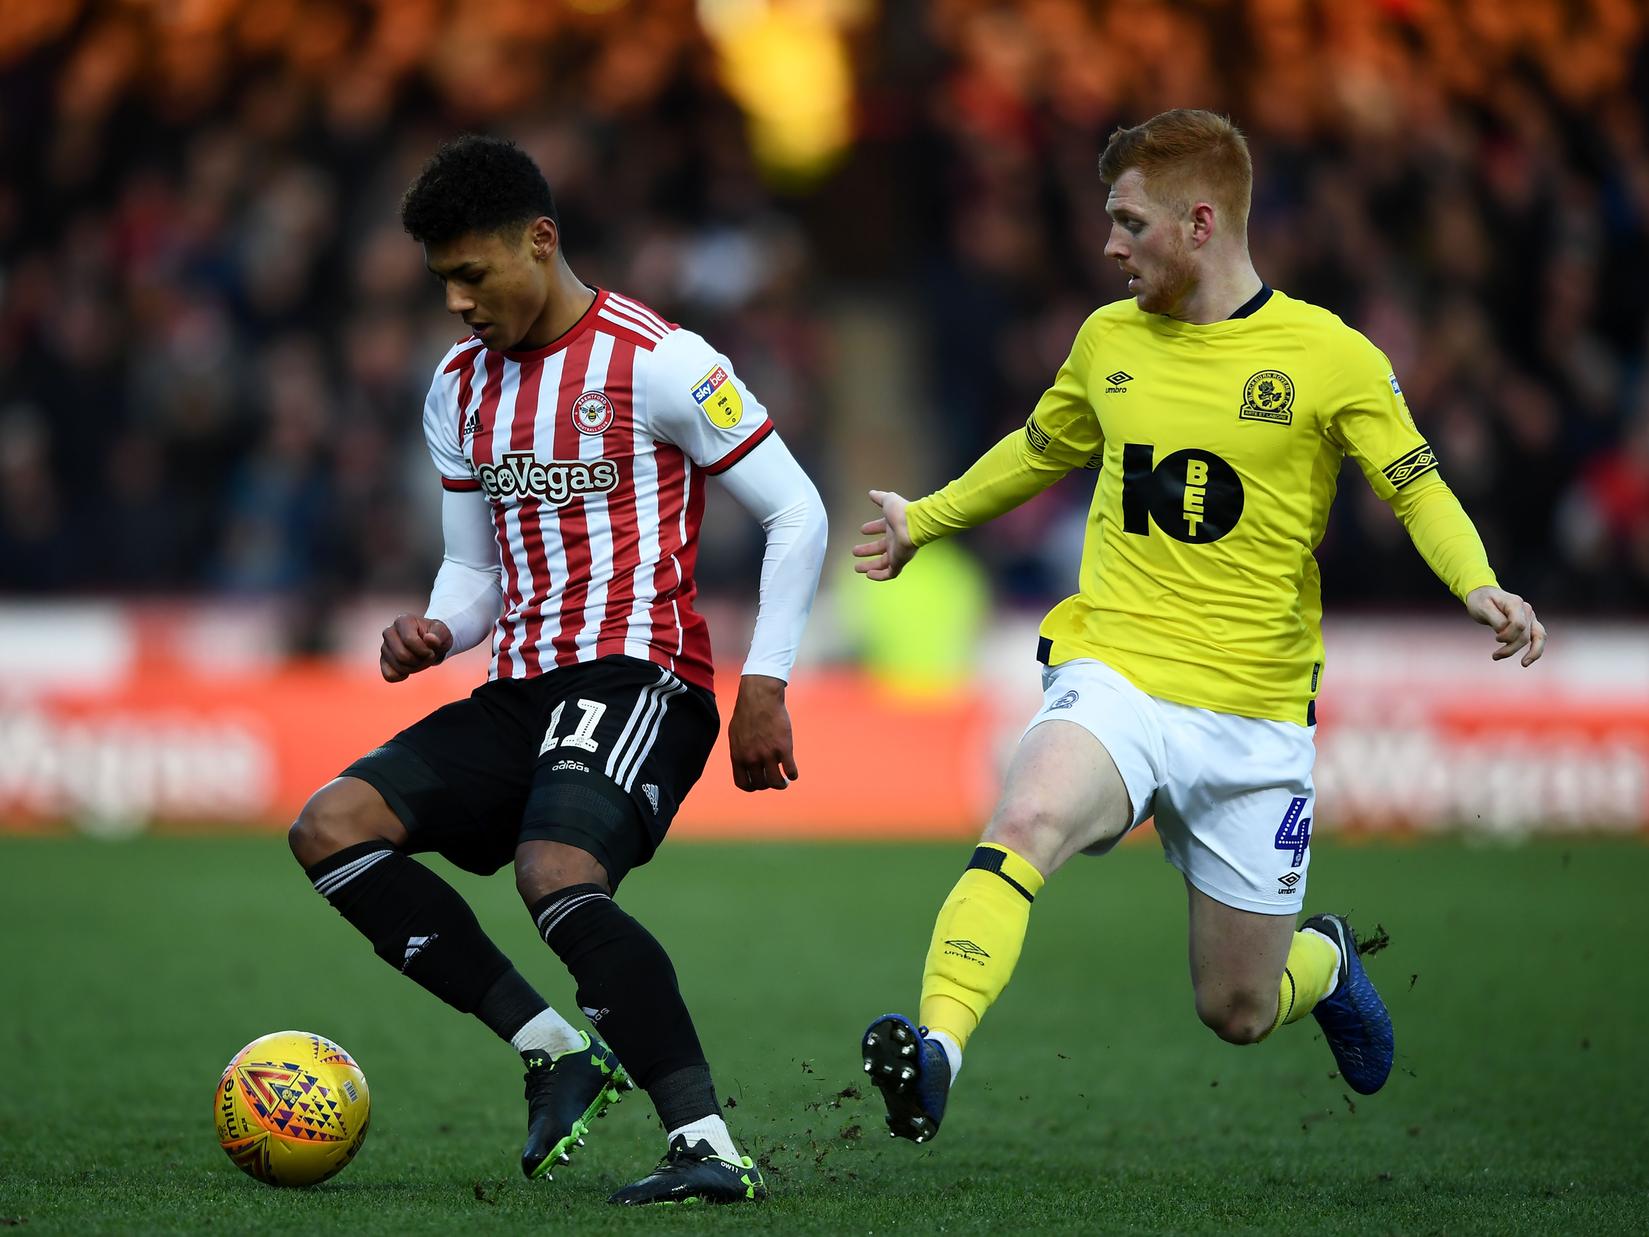 Brentford striker Ollie Watkins has insisted that his sole focus is scoring goals and succeeding goals for the Bees this season, following rumours linking him with a January move to Sheffield United. (West London Sport)